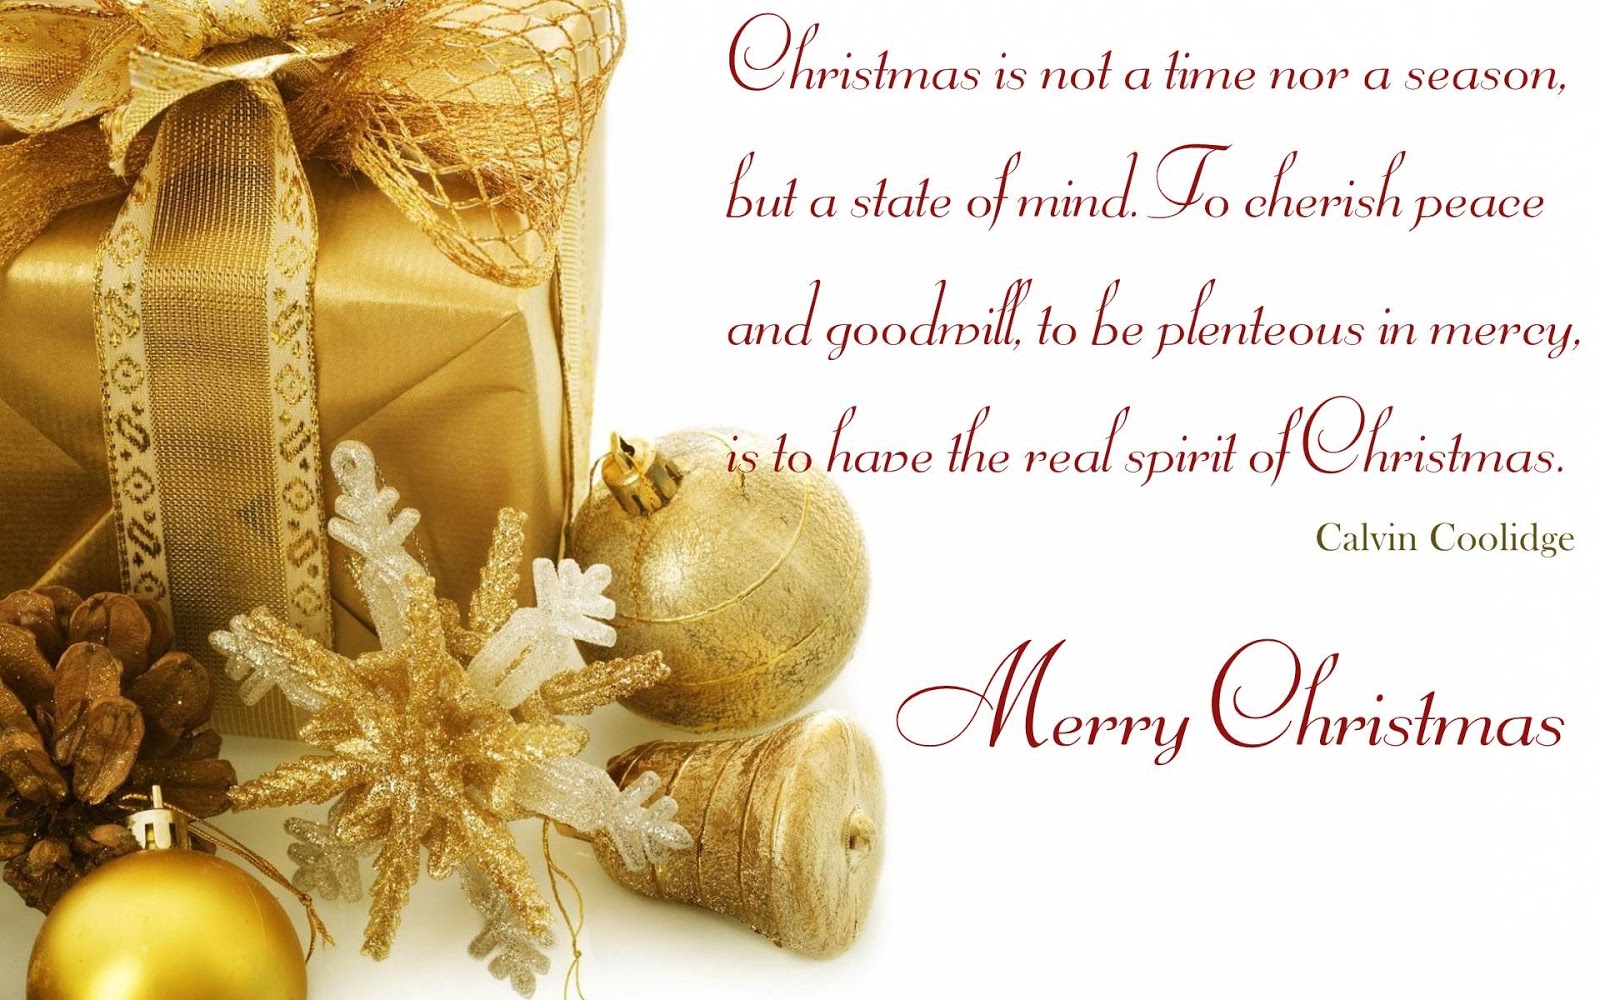 Merry Christmas 2015 Wishes Quotes Cards And Songs Some Famous 